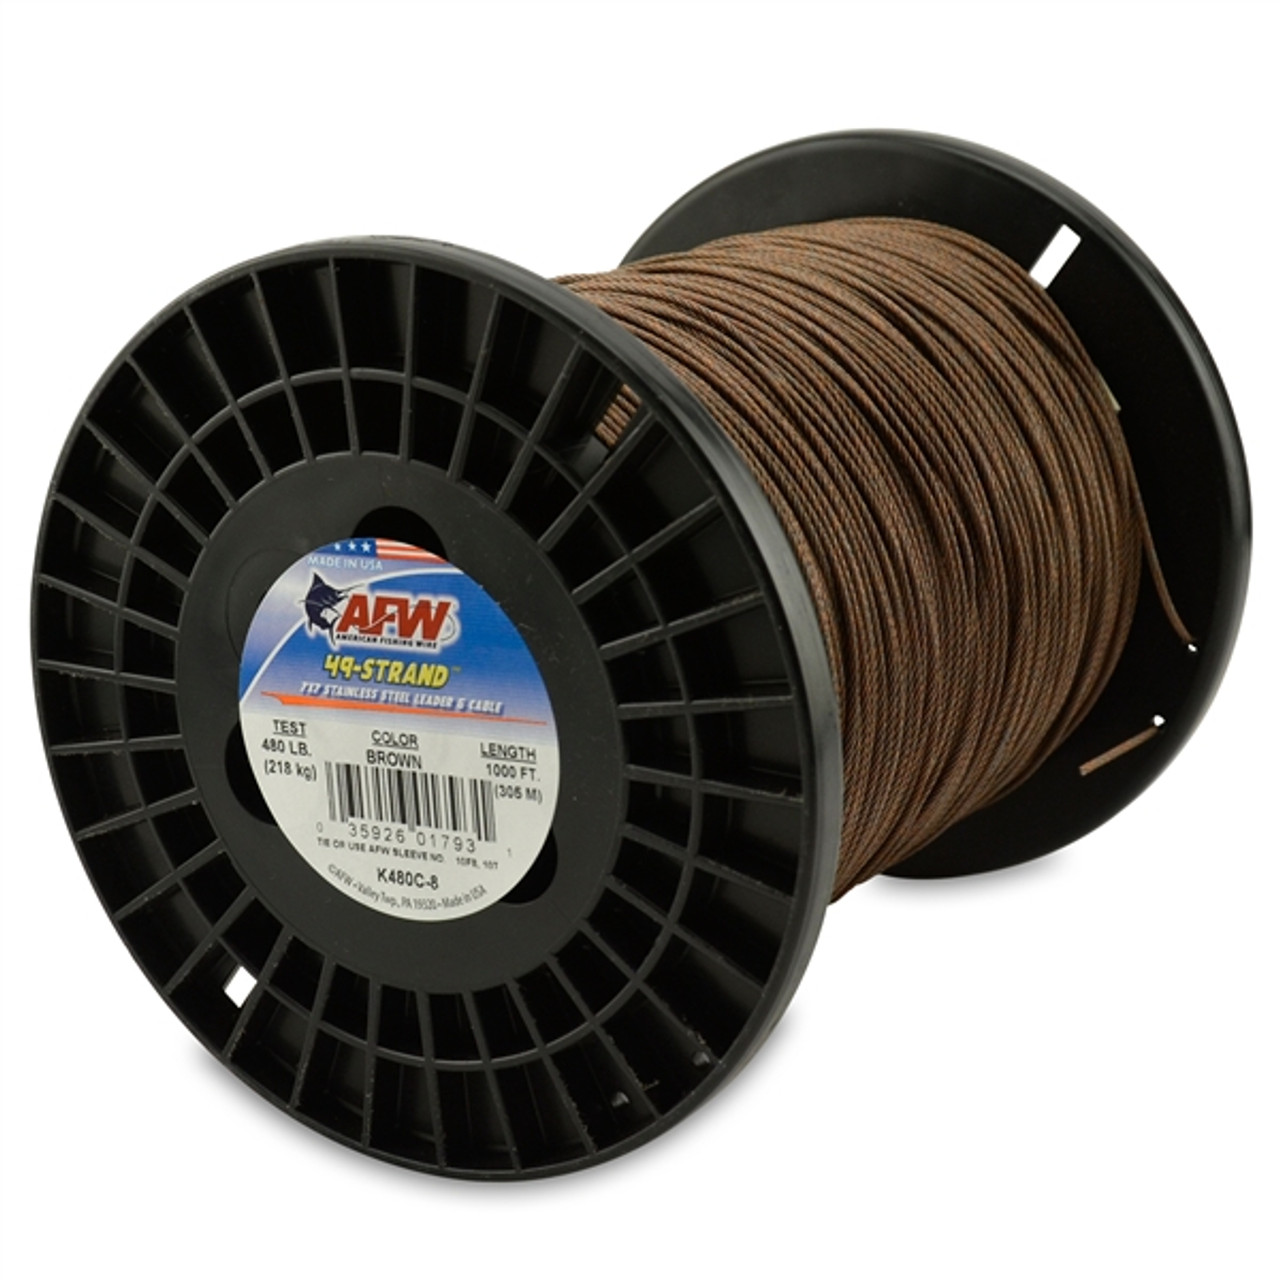 American Fishing Wire 49 Strand Camo Brown 1000ftTest: 600